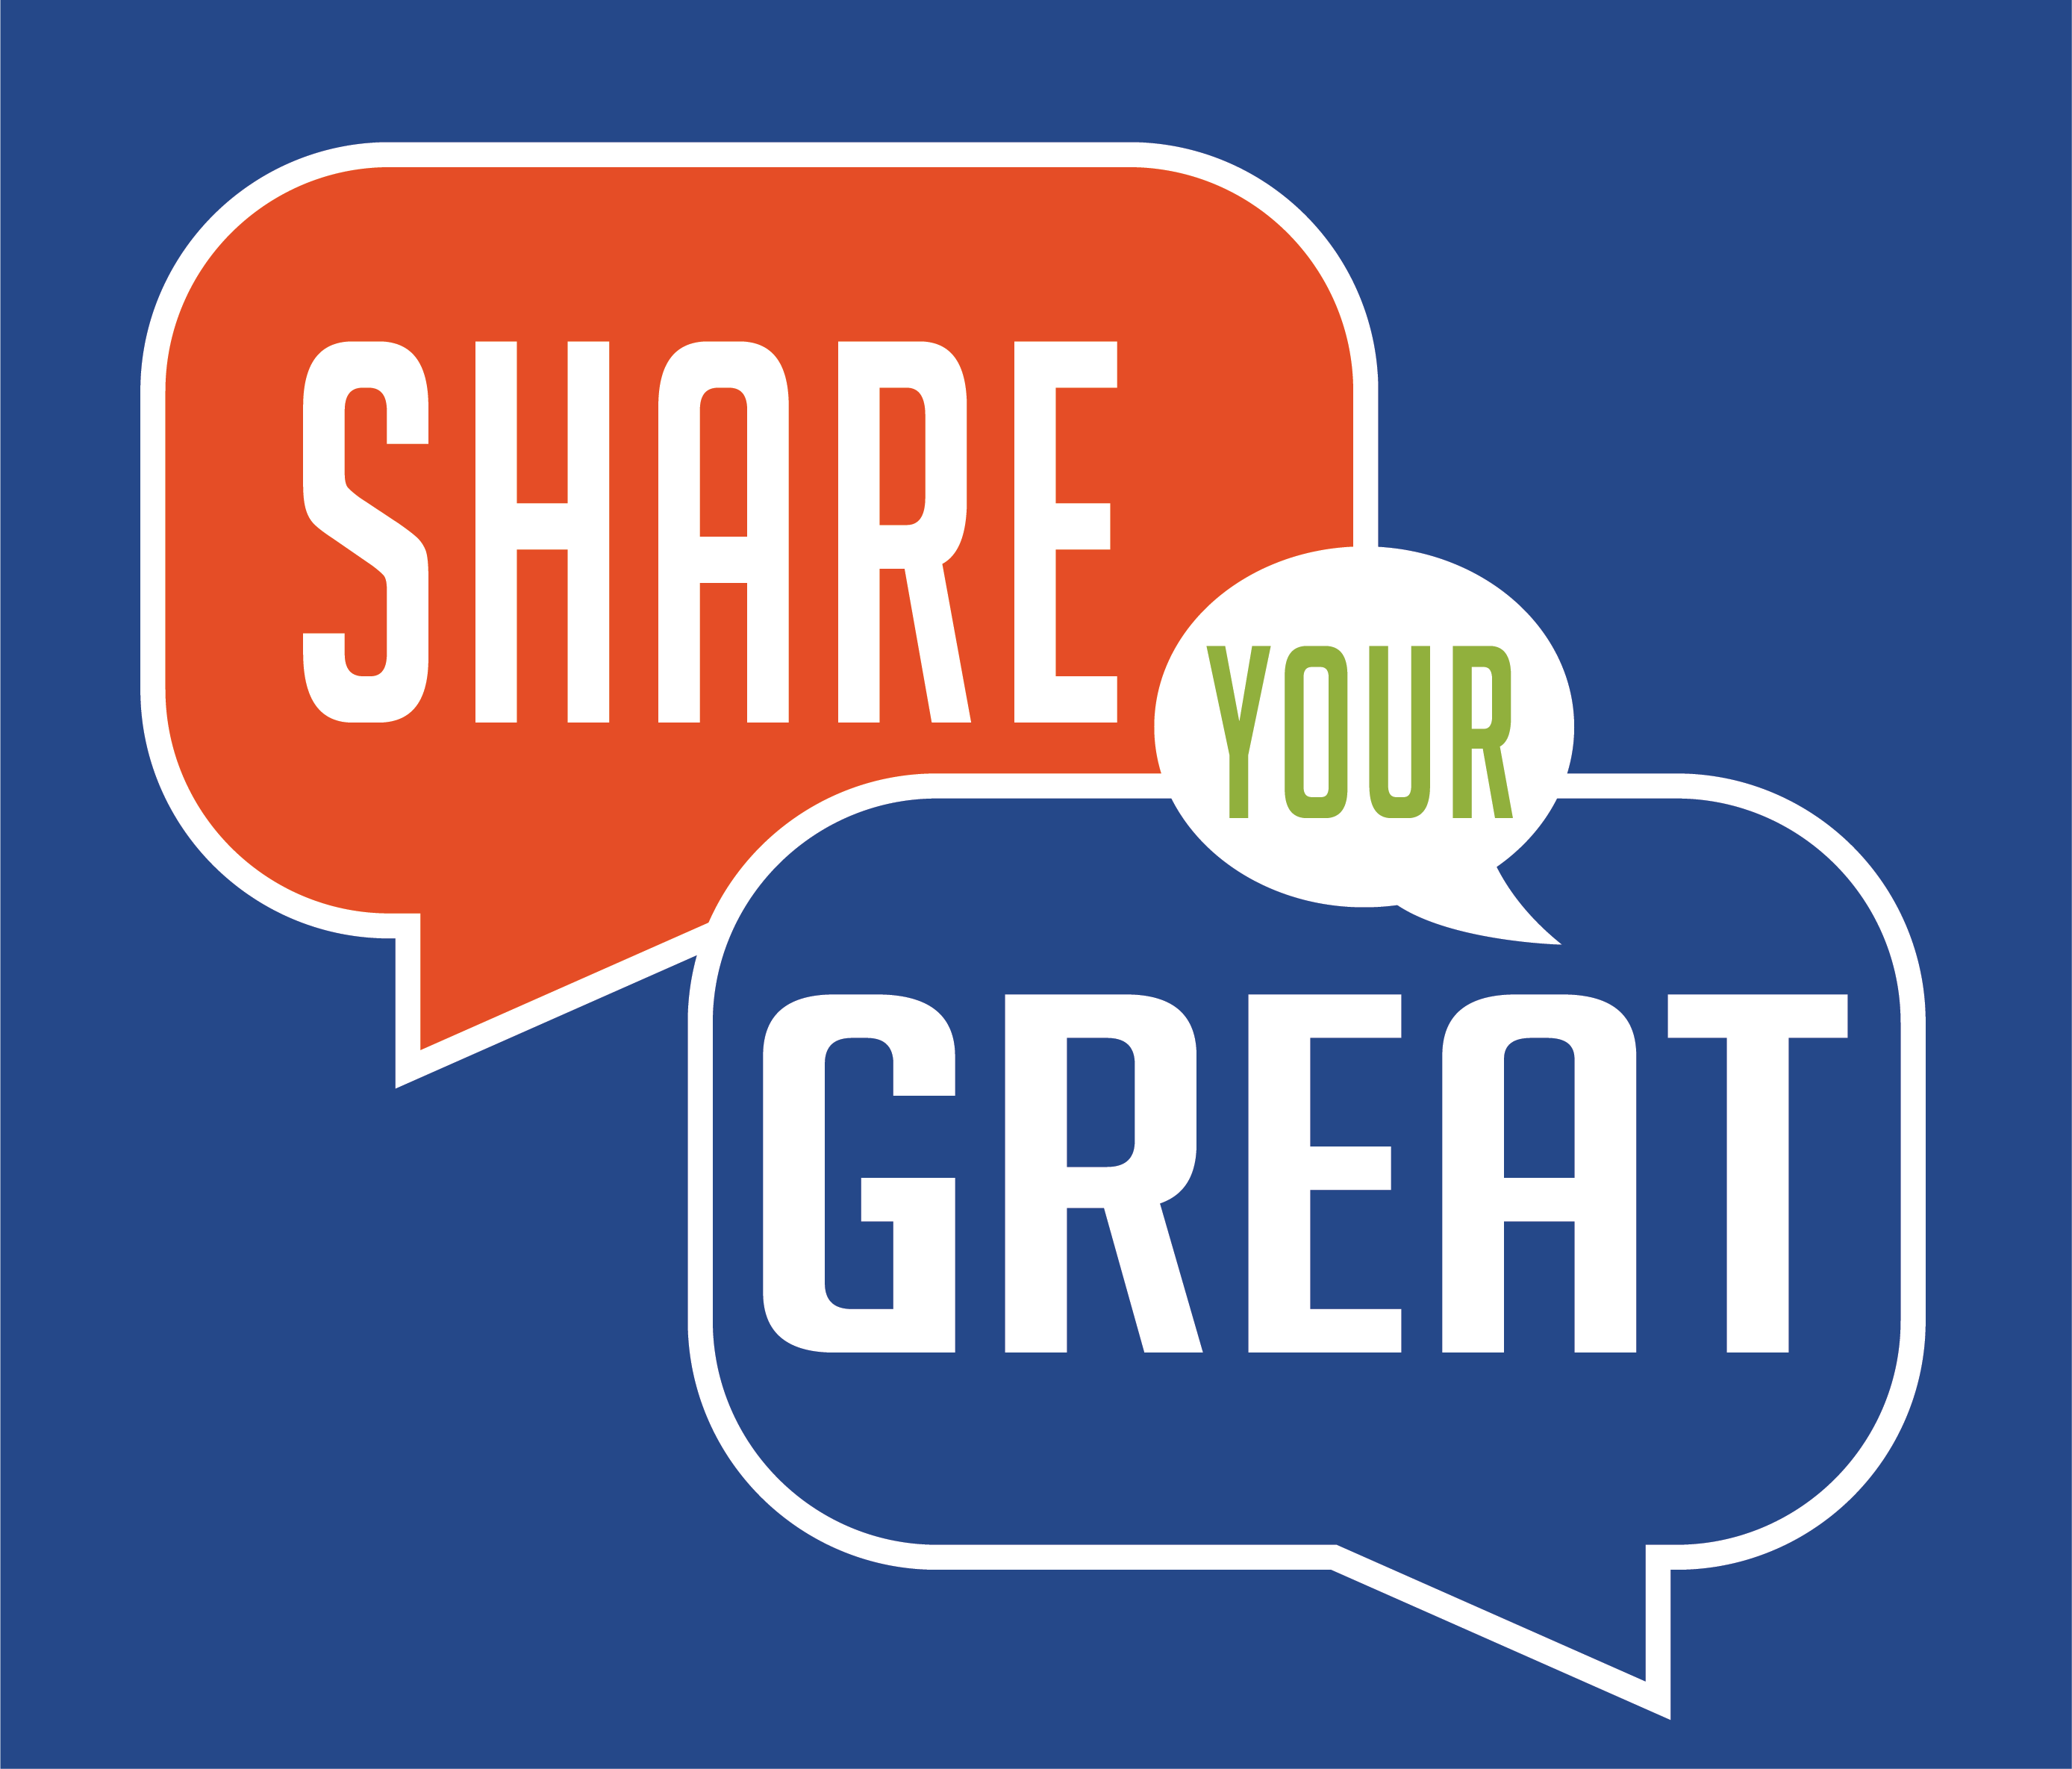 Share your great